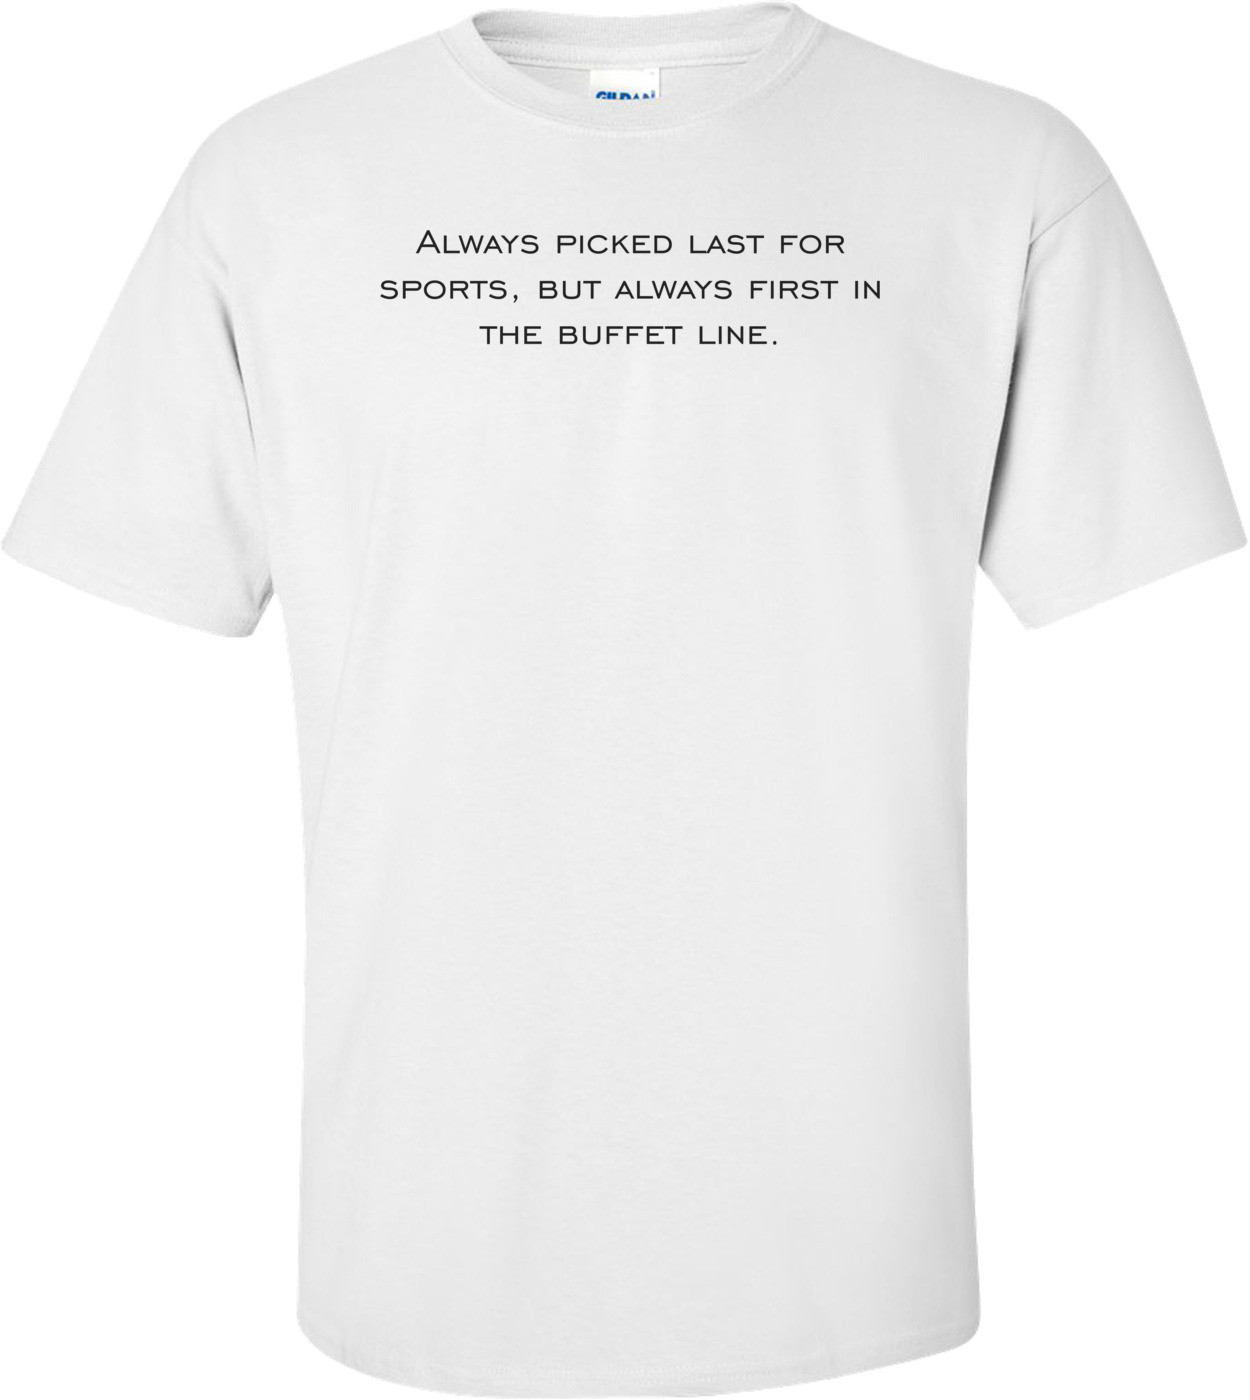 Always picked last for sports, but always first in the buffet line. Shirt